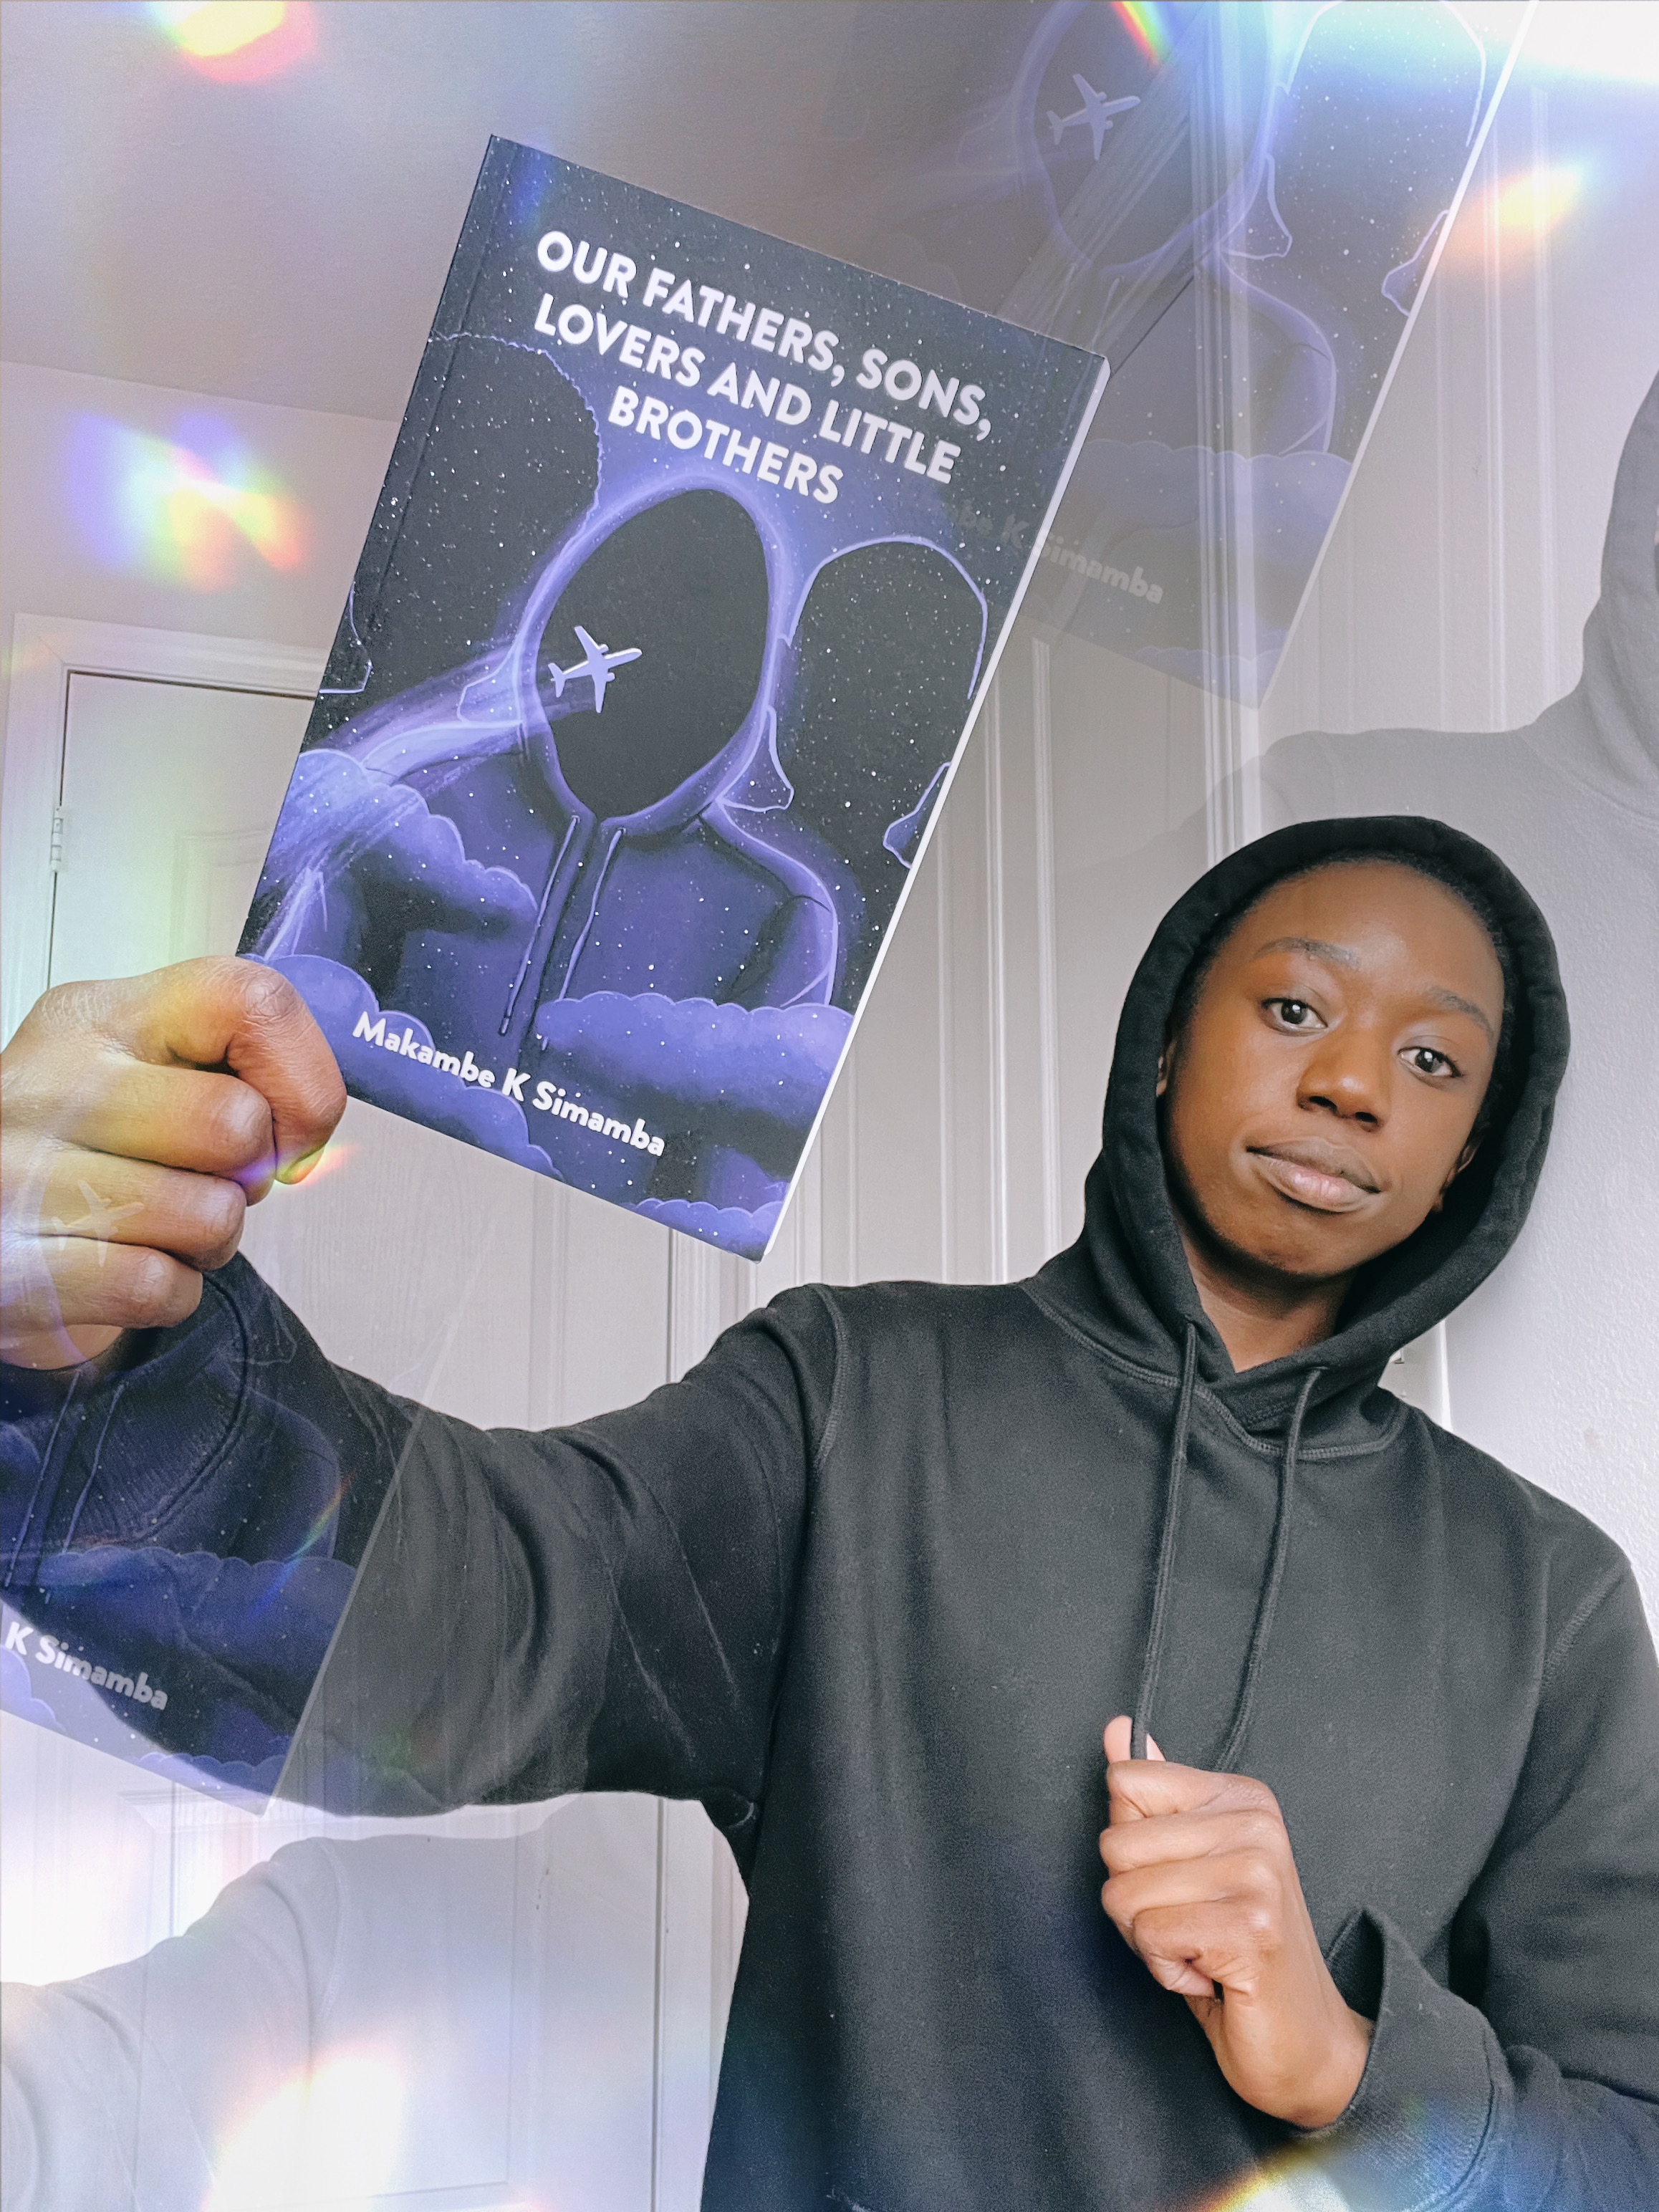 Makambe K Simamba dressed in character, wearing a black hoodie, for Our Fathers, Sons, Lovers and Little Brothers, holds a copy of the book